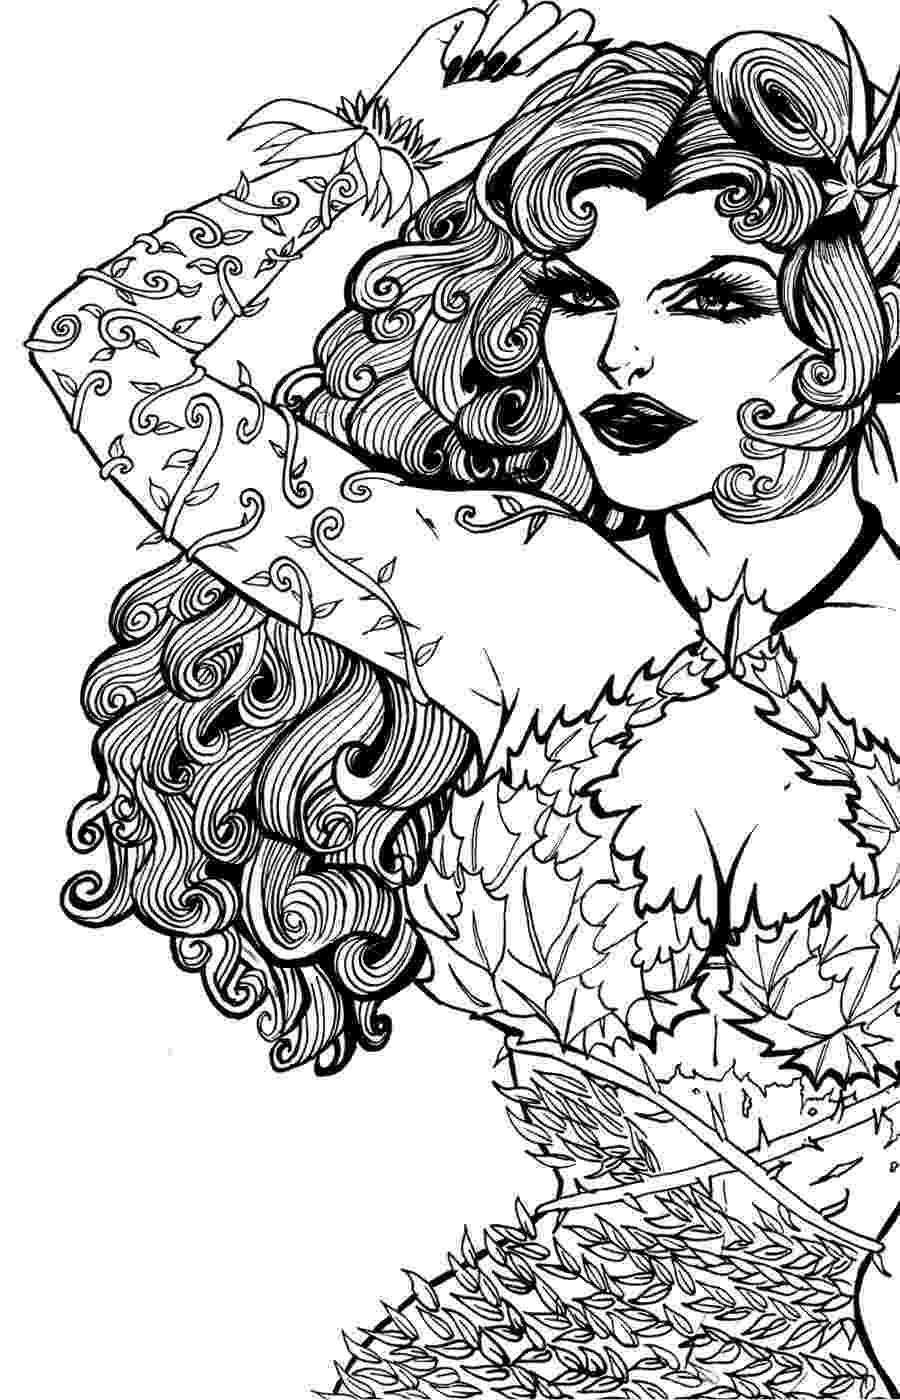 poison ivy coloring page poison ivy coloring pages to download and print for free page ivy poison coloring 